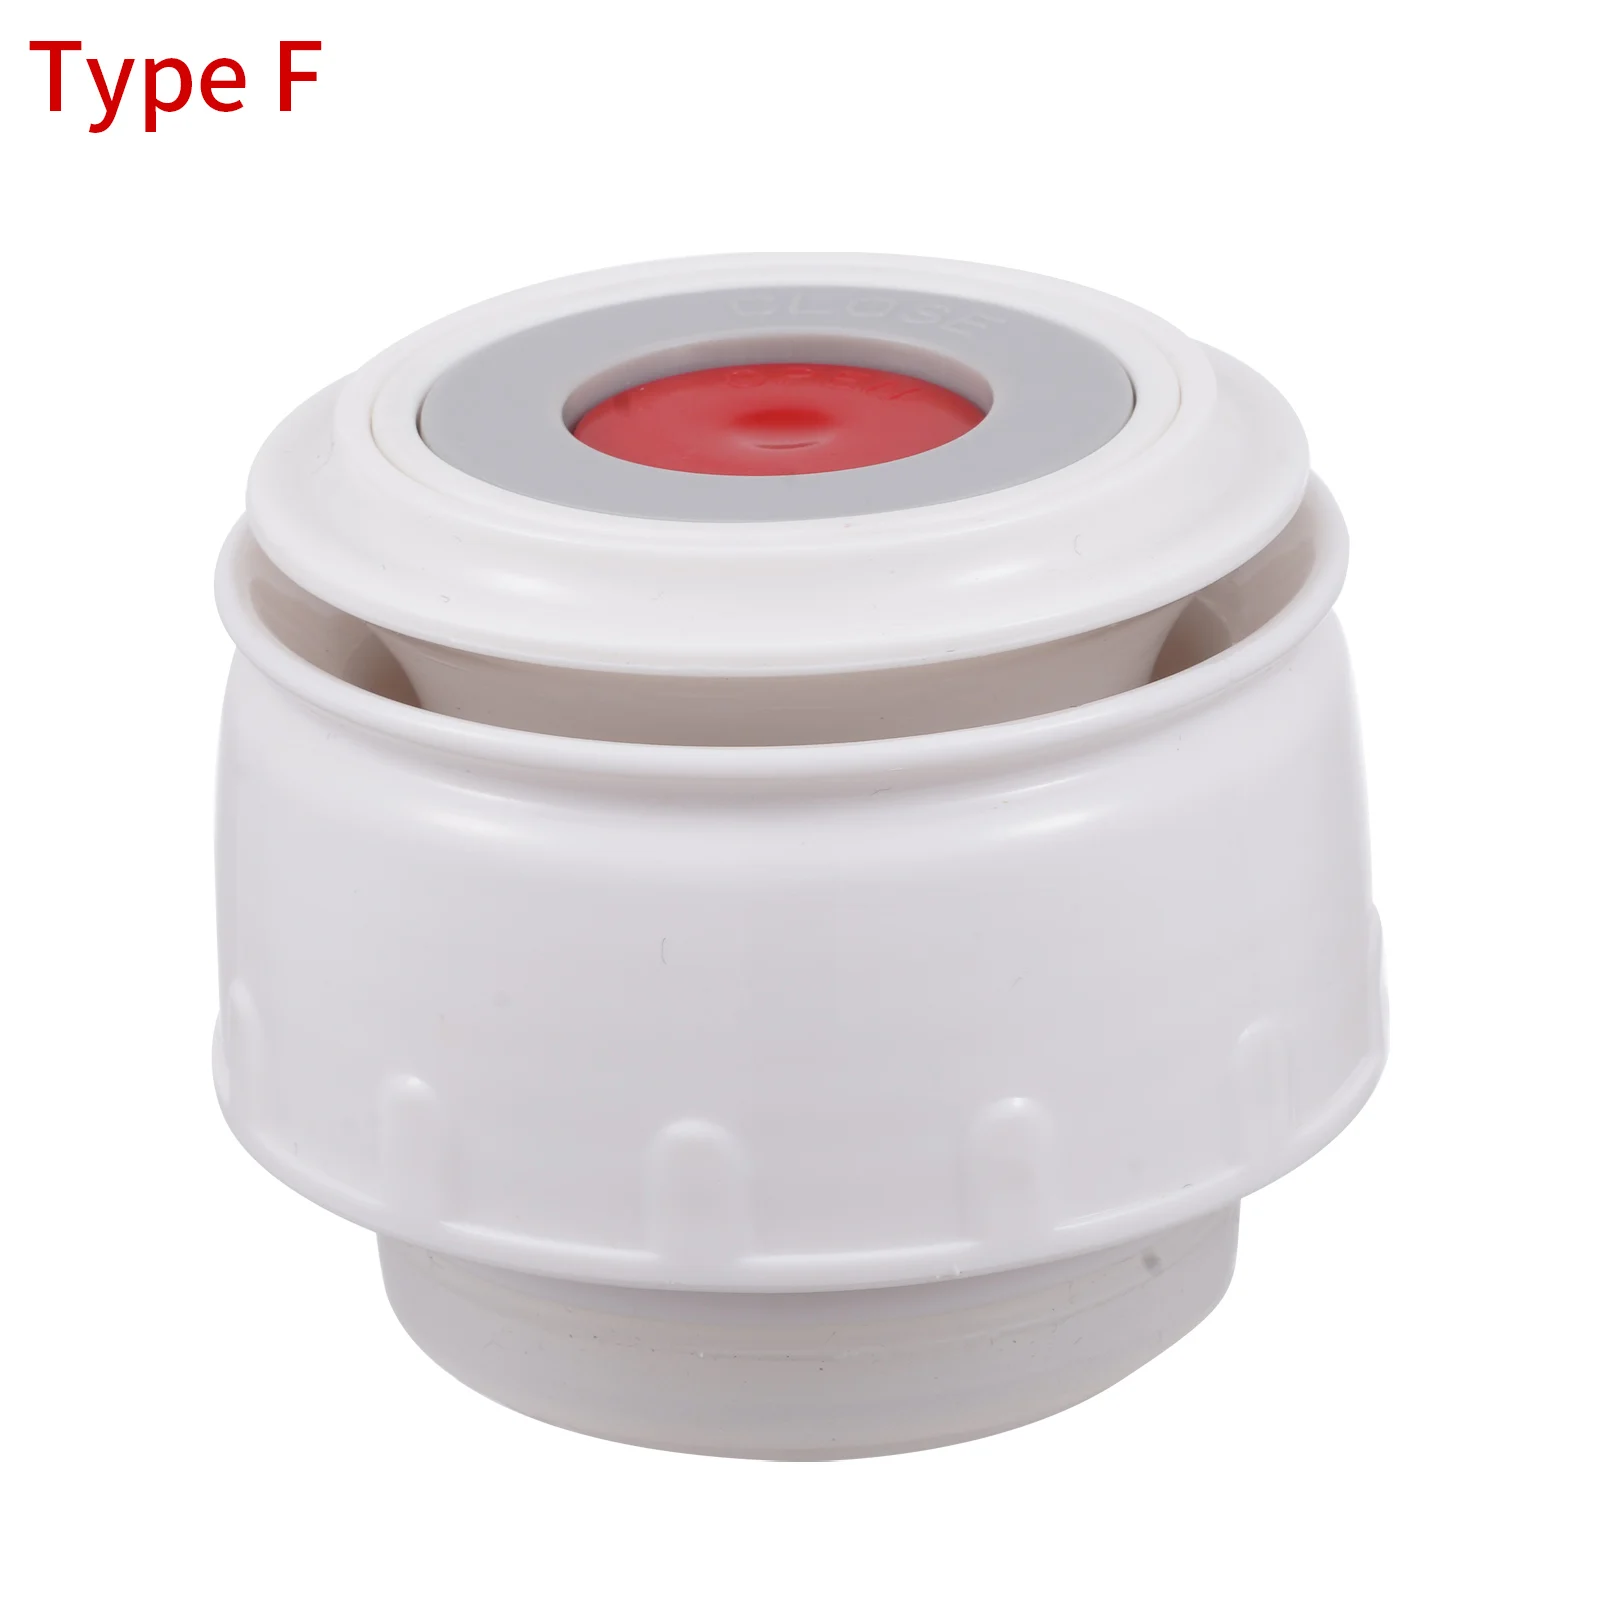 Plastic Insulation Cup Lid Vacuum Bottle Flask Stopper Travel Thermal Drink Jar Cap Bullet Shape Water Mug Cover Cup Accessories